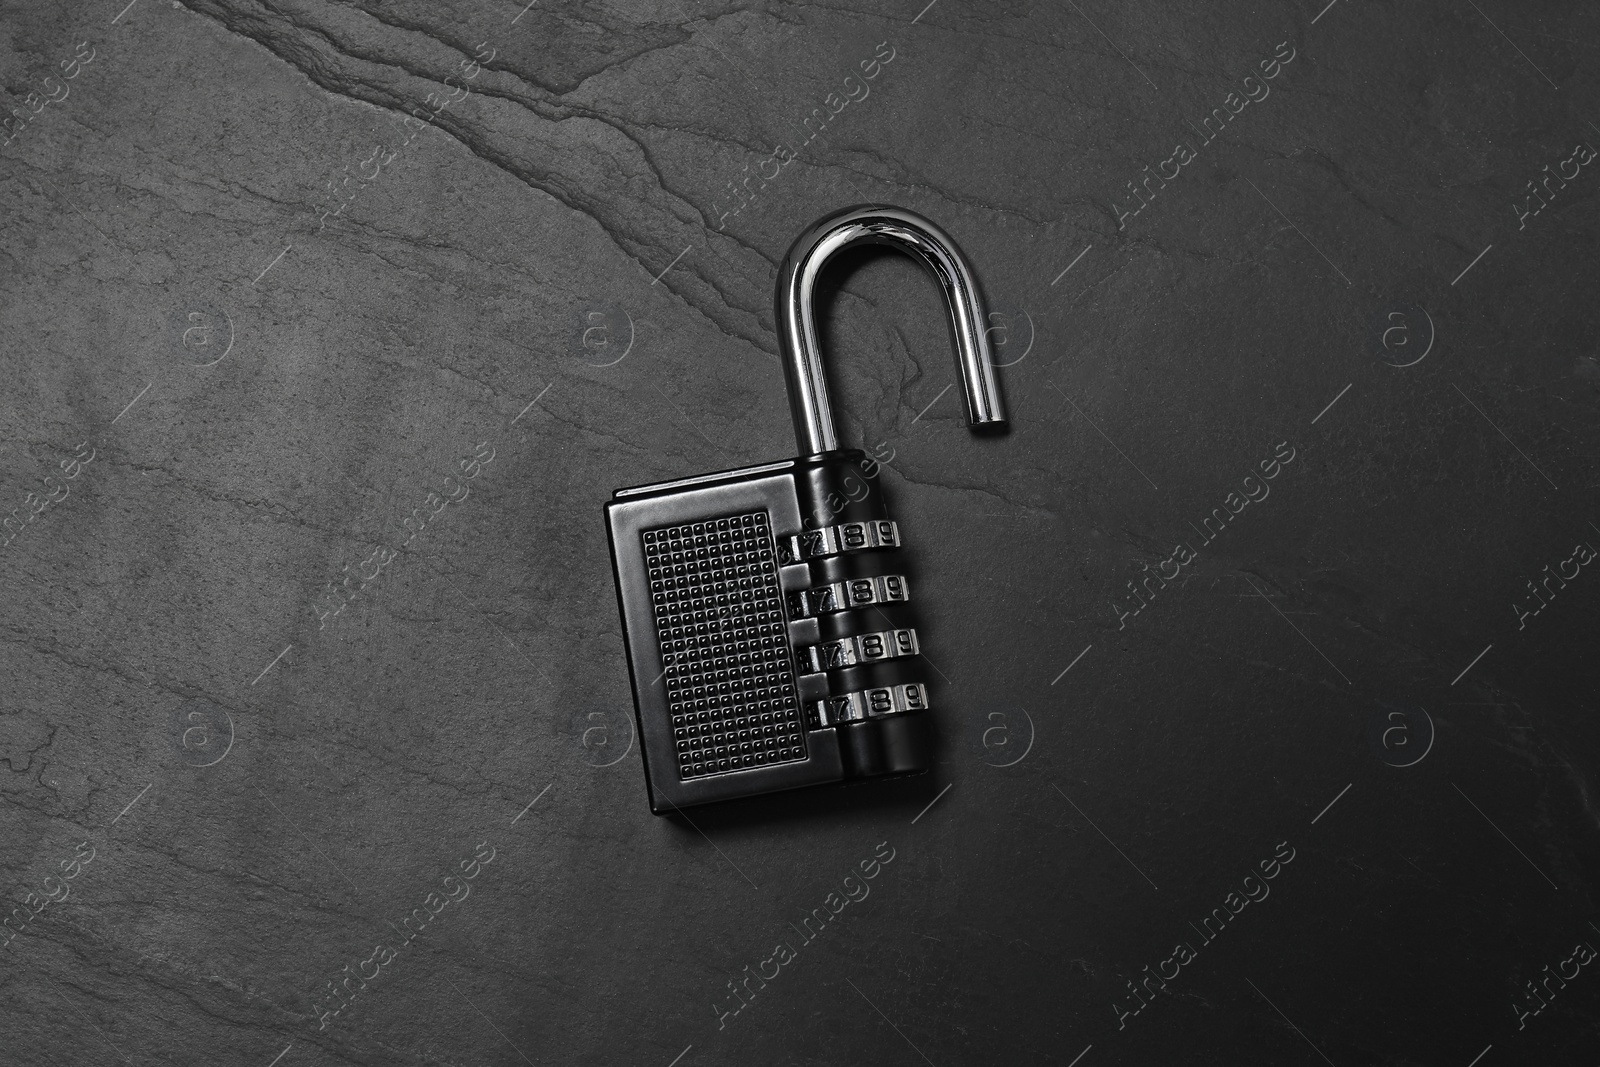 Photo of One steel combination padlock on black table, top view